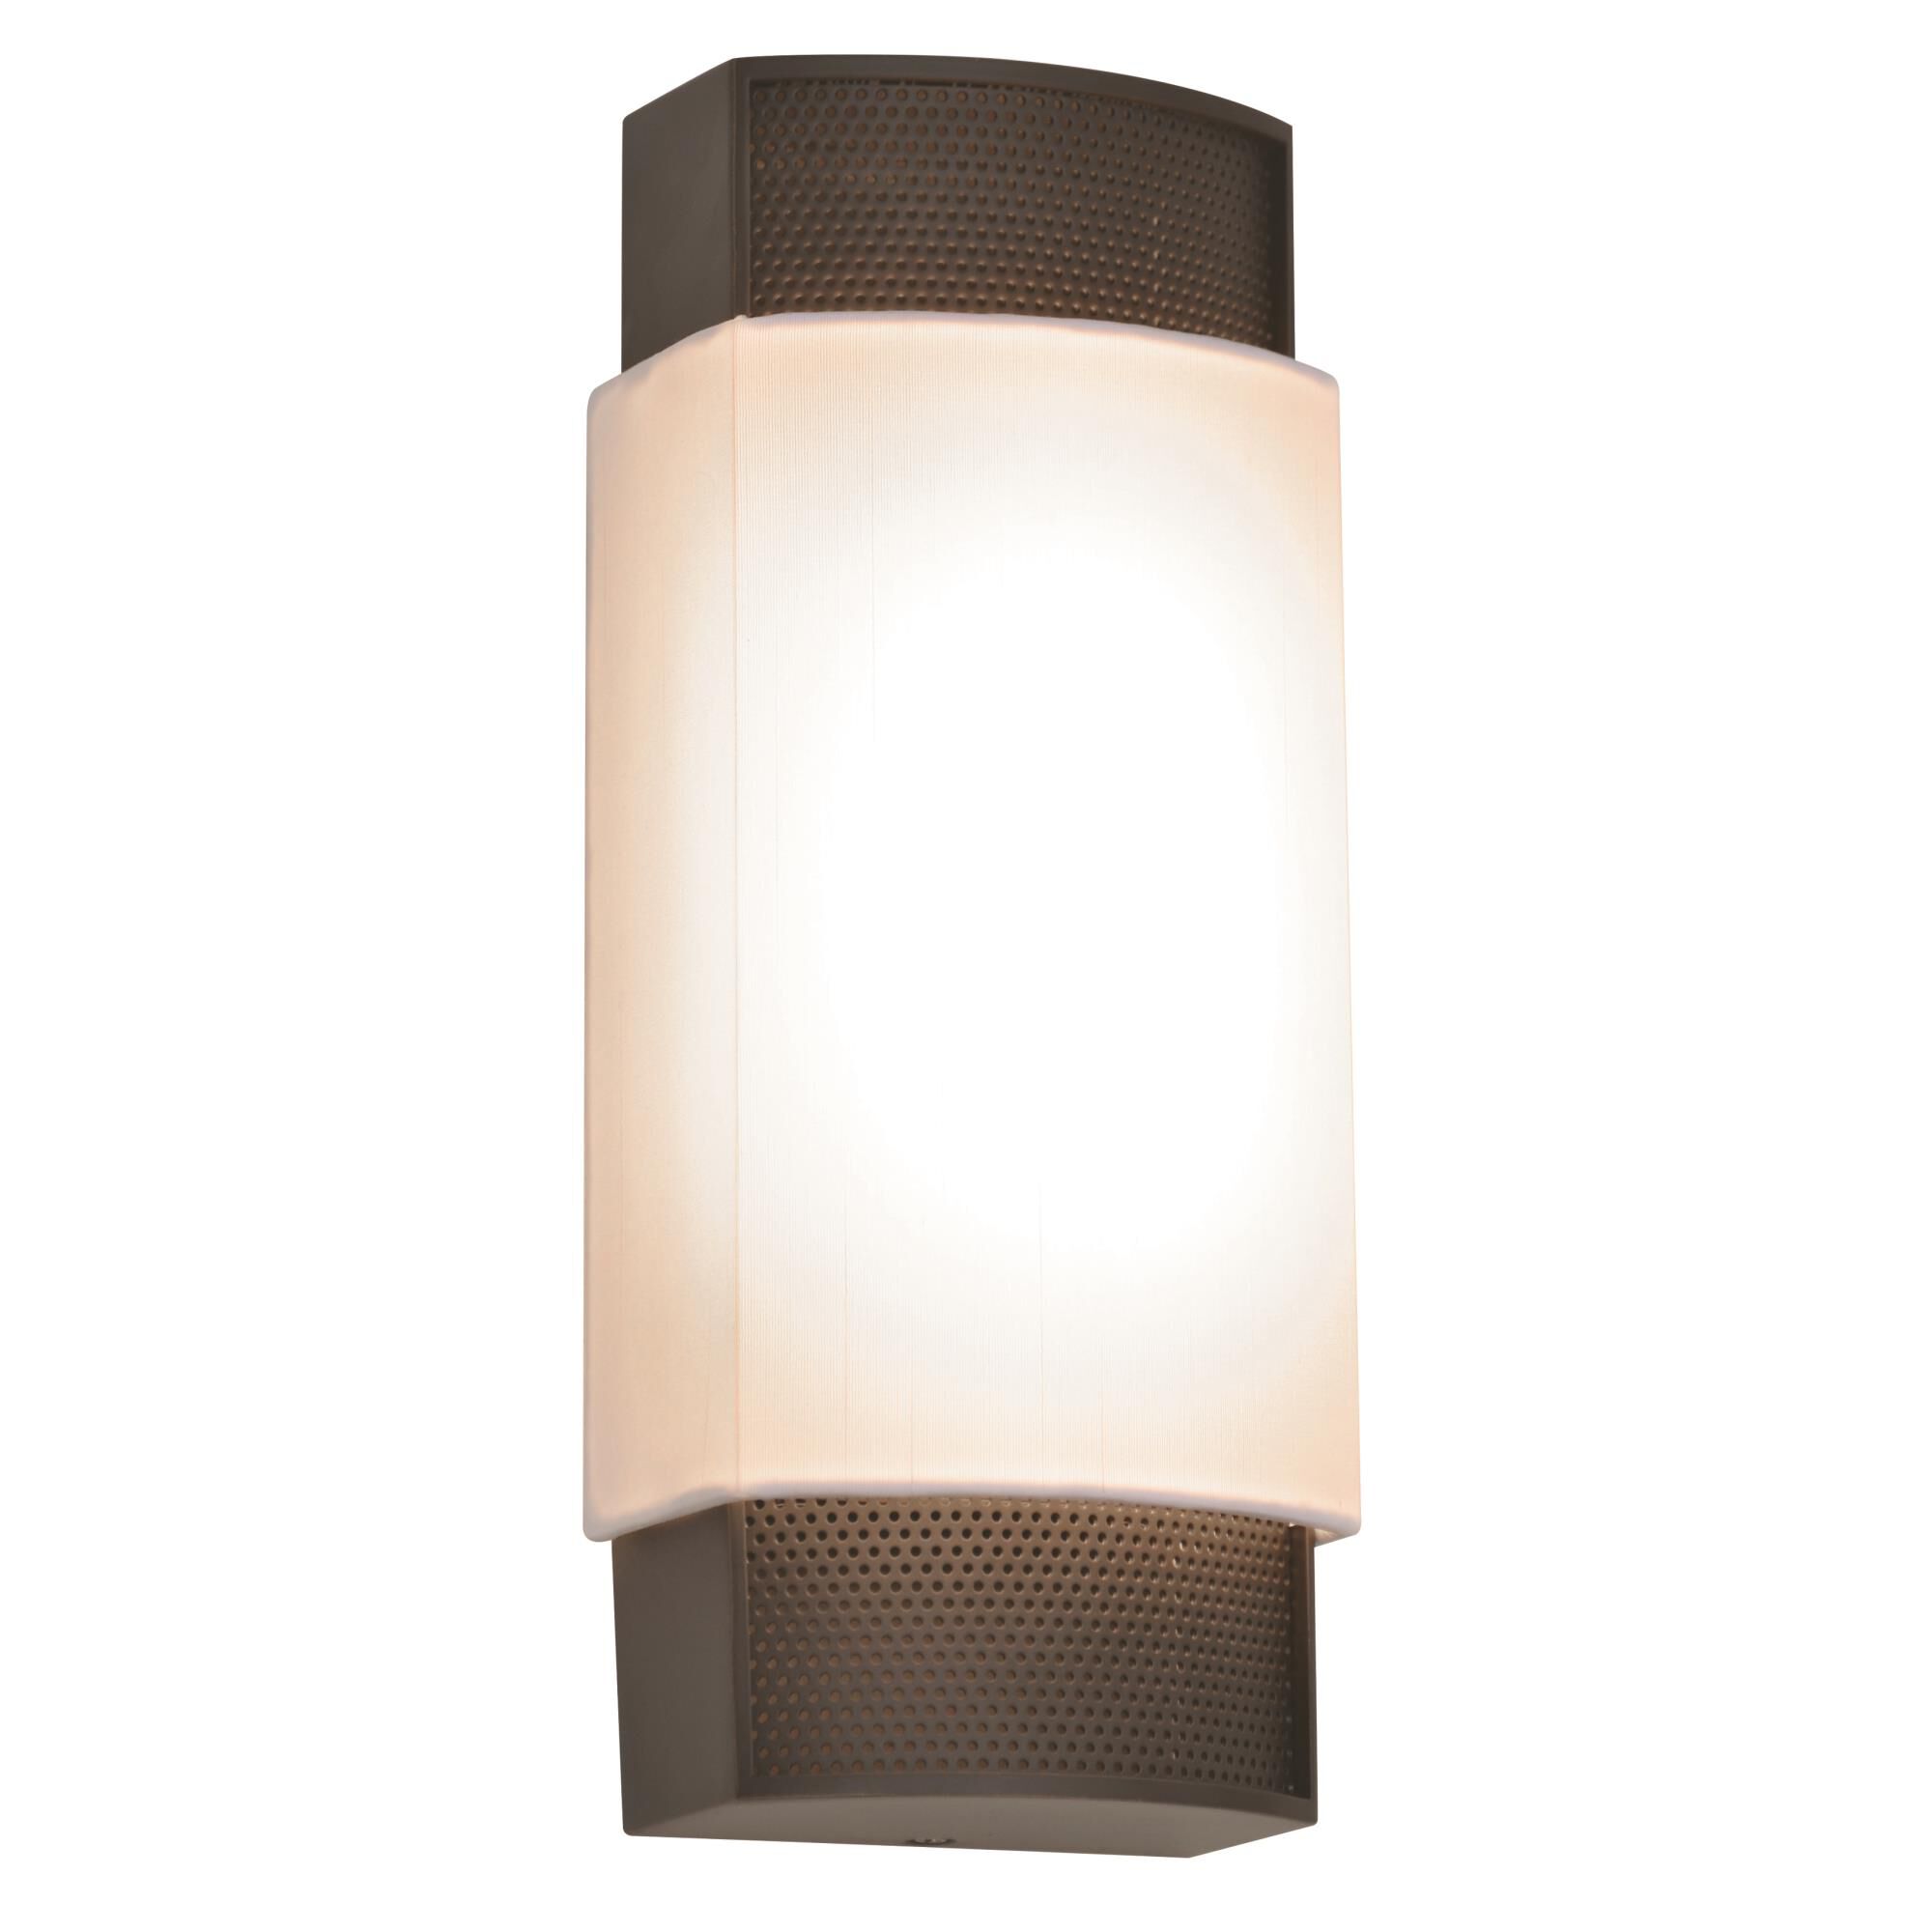 Photos - Chandelier / Lamp AFX Lighting Charlotte 13 Inch LED Wall Sconce Charlotte - CHS061407LAJUDR 